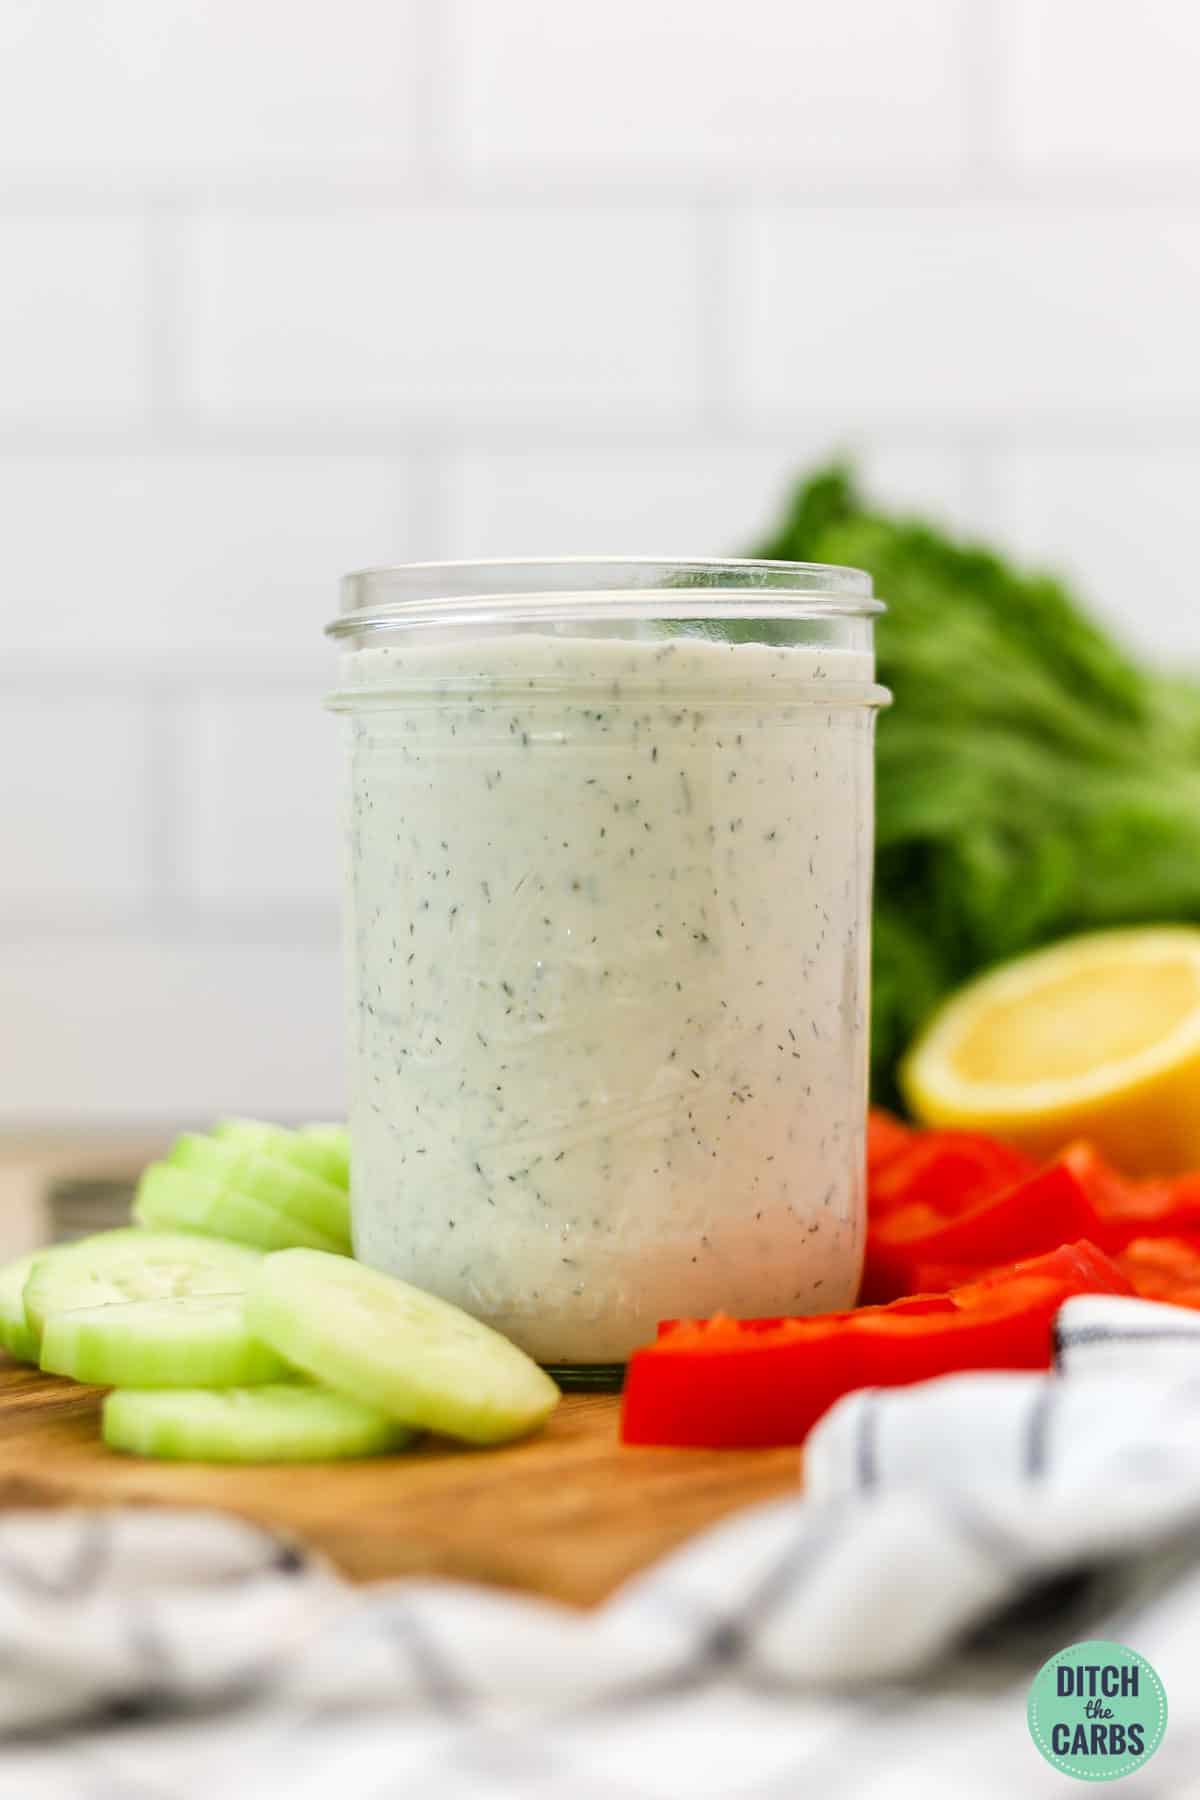 A jar of keto ranch dressing on a wooden tray with sliced raw vegetables around it.